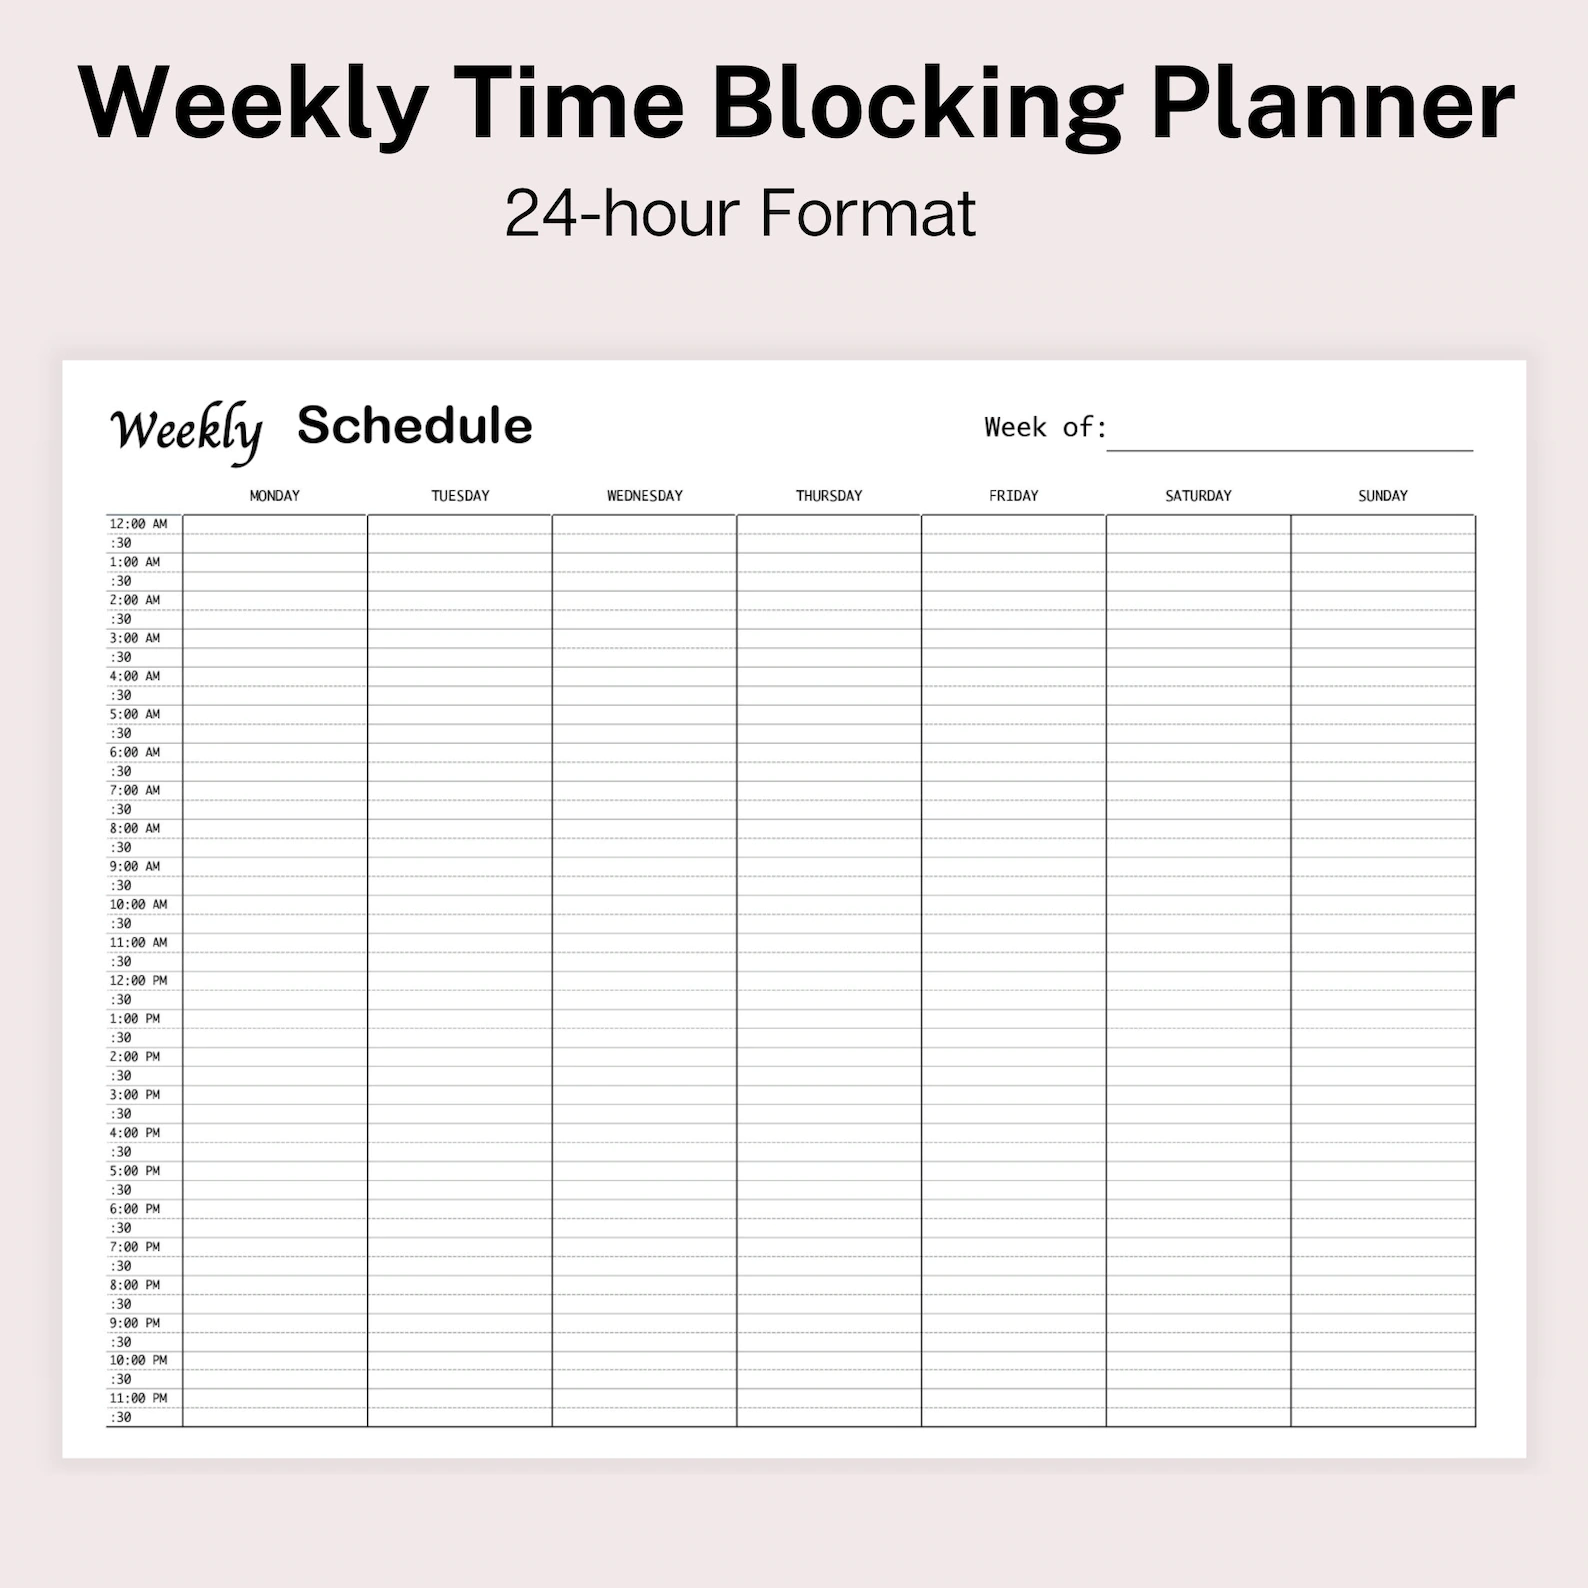 printable-24-hour-weekly-planner-with-30-minute-time-increment-strivezen